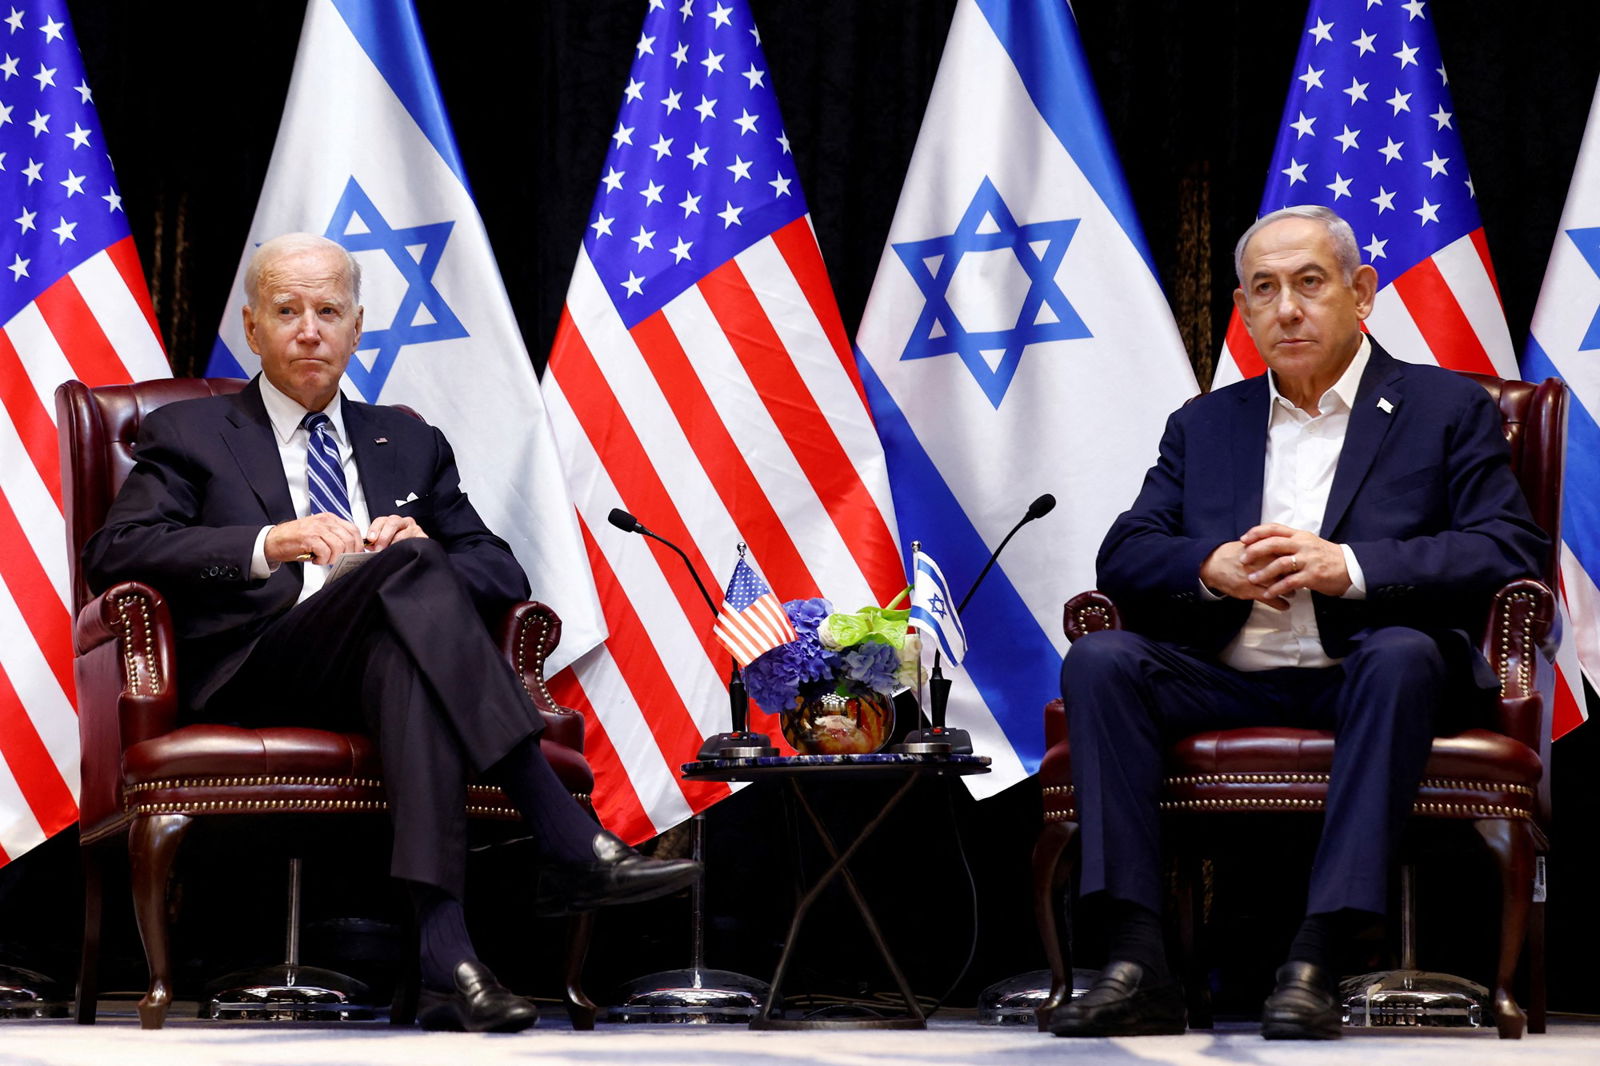 Joe Biden and Benjamin Netanyahu sit on two arm chairs next to each other with Israeli and USA flags behind